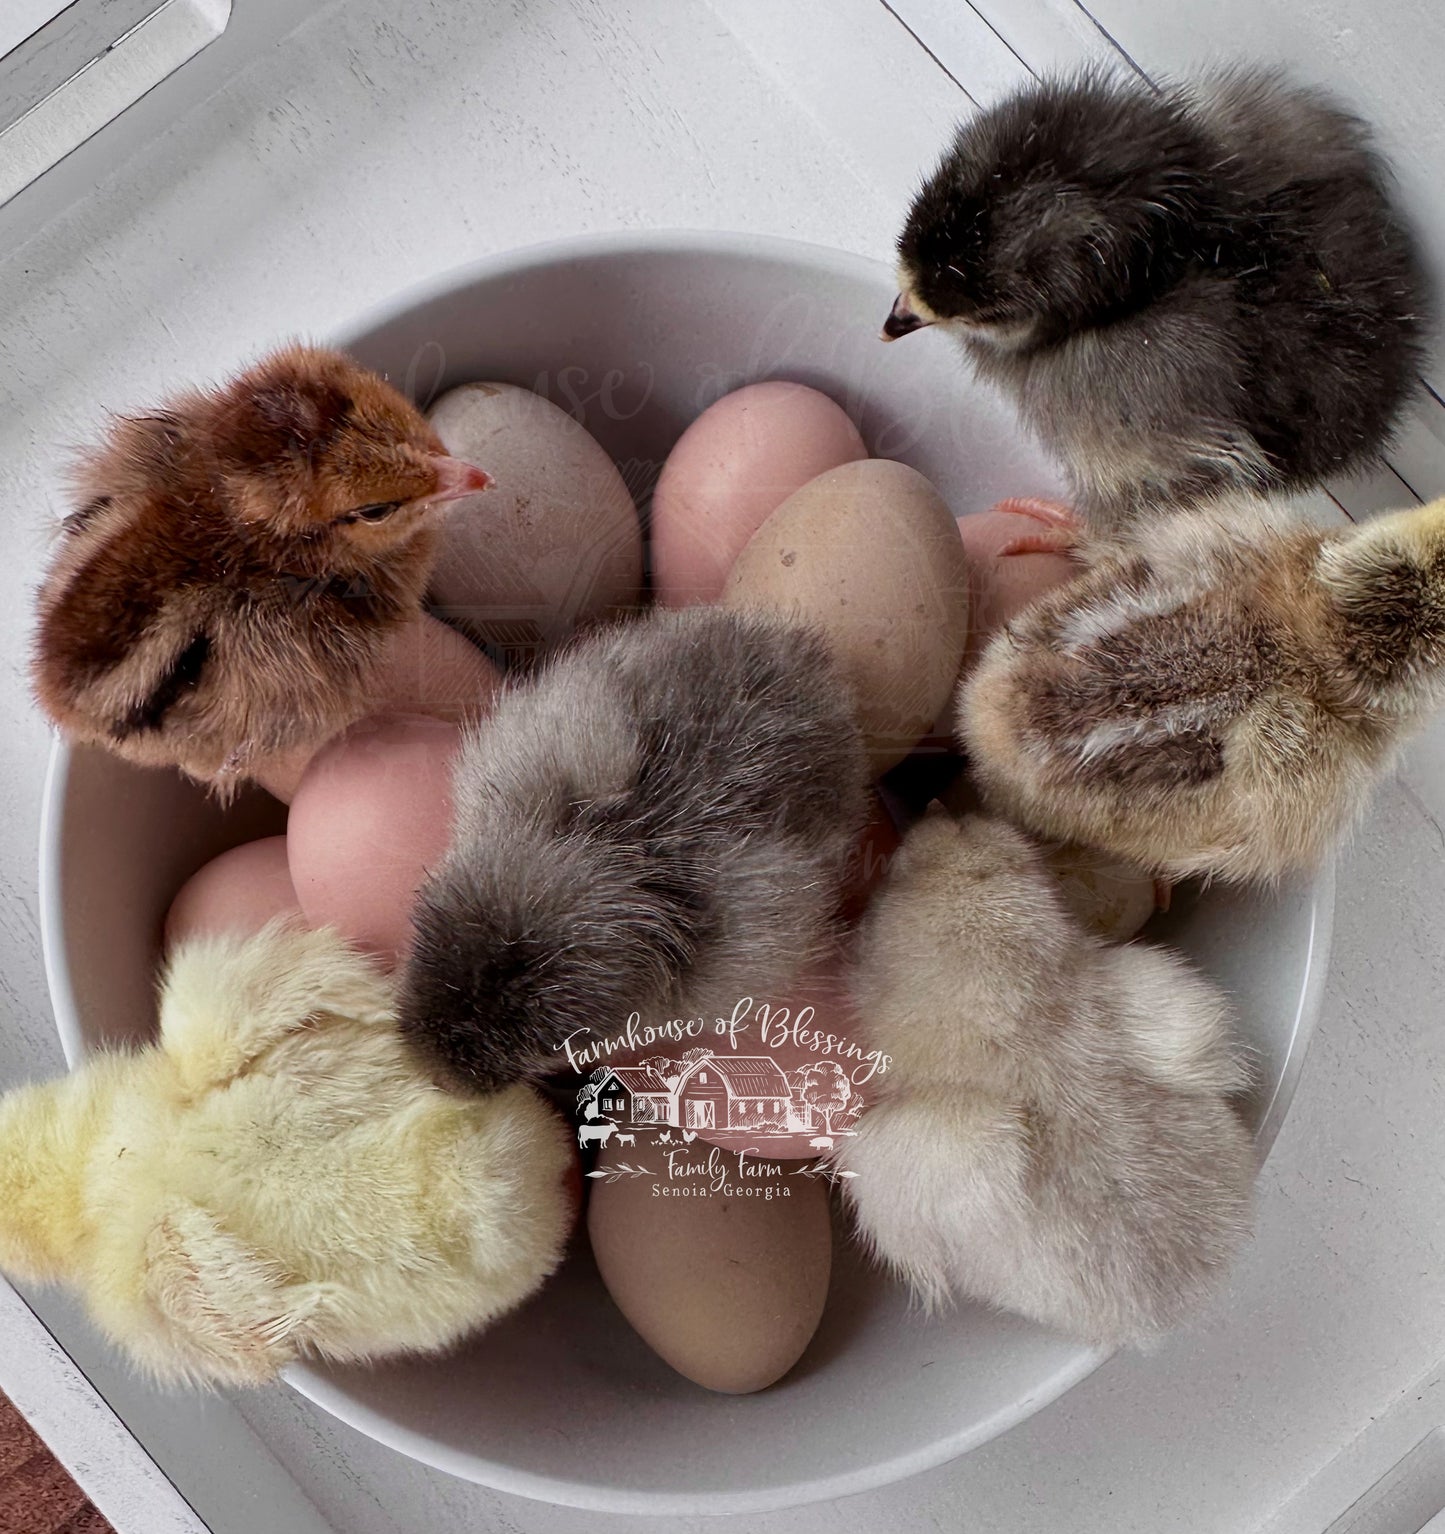 Heavy Bloom - Frosted Bloomers - Day Old Chicks